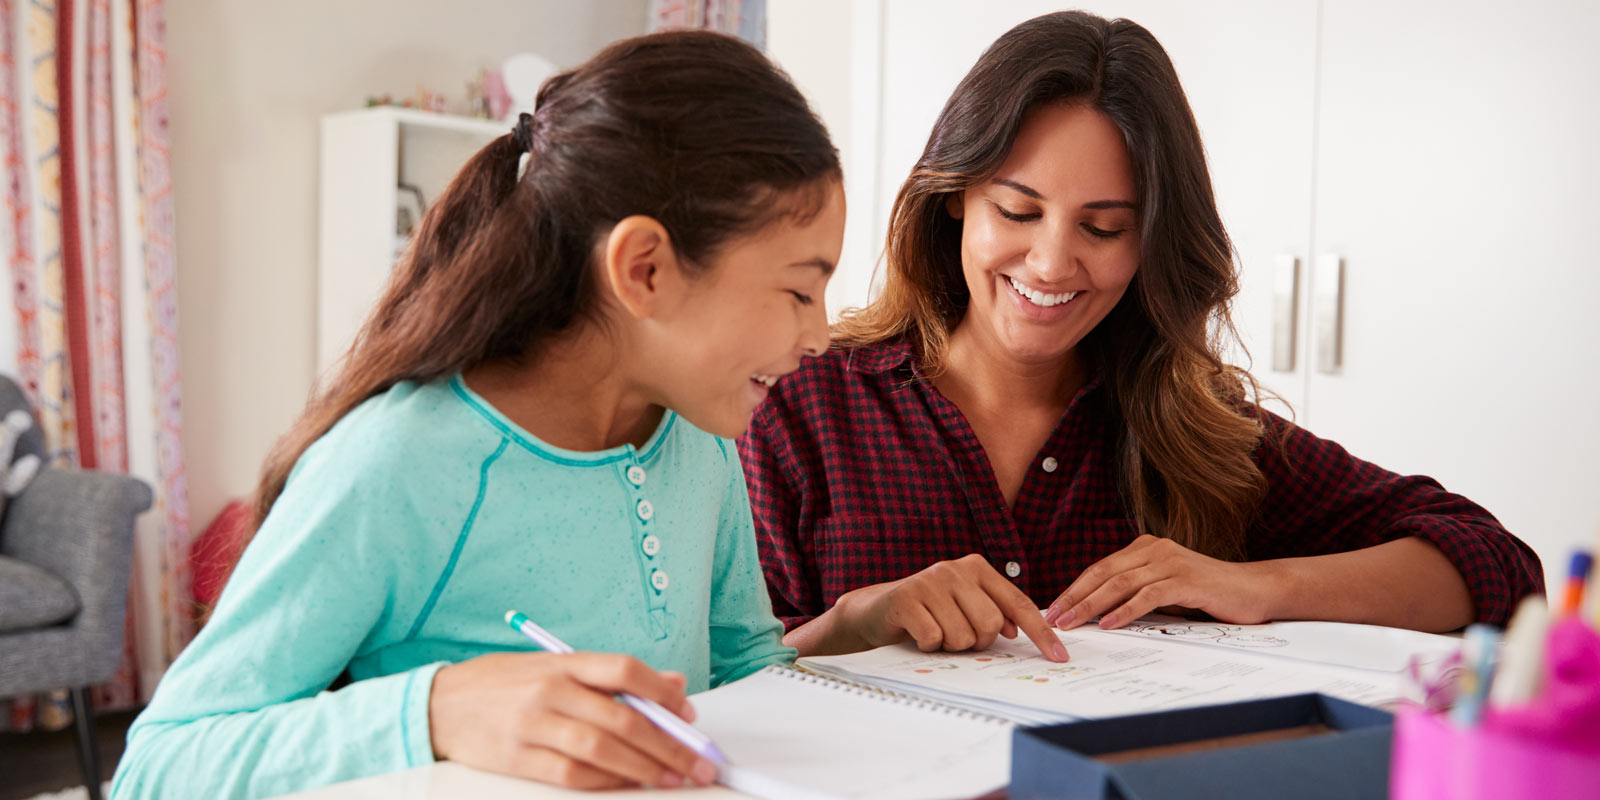 alt="A smiling adult assisting a smiling child with school work"